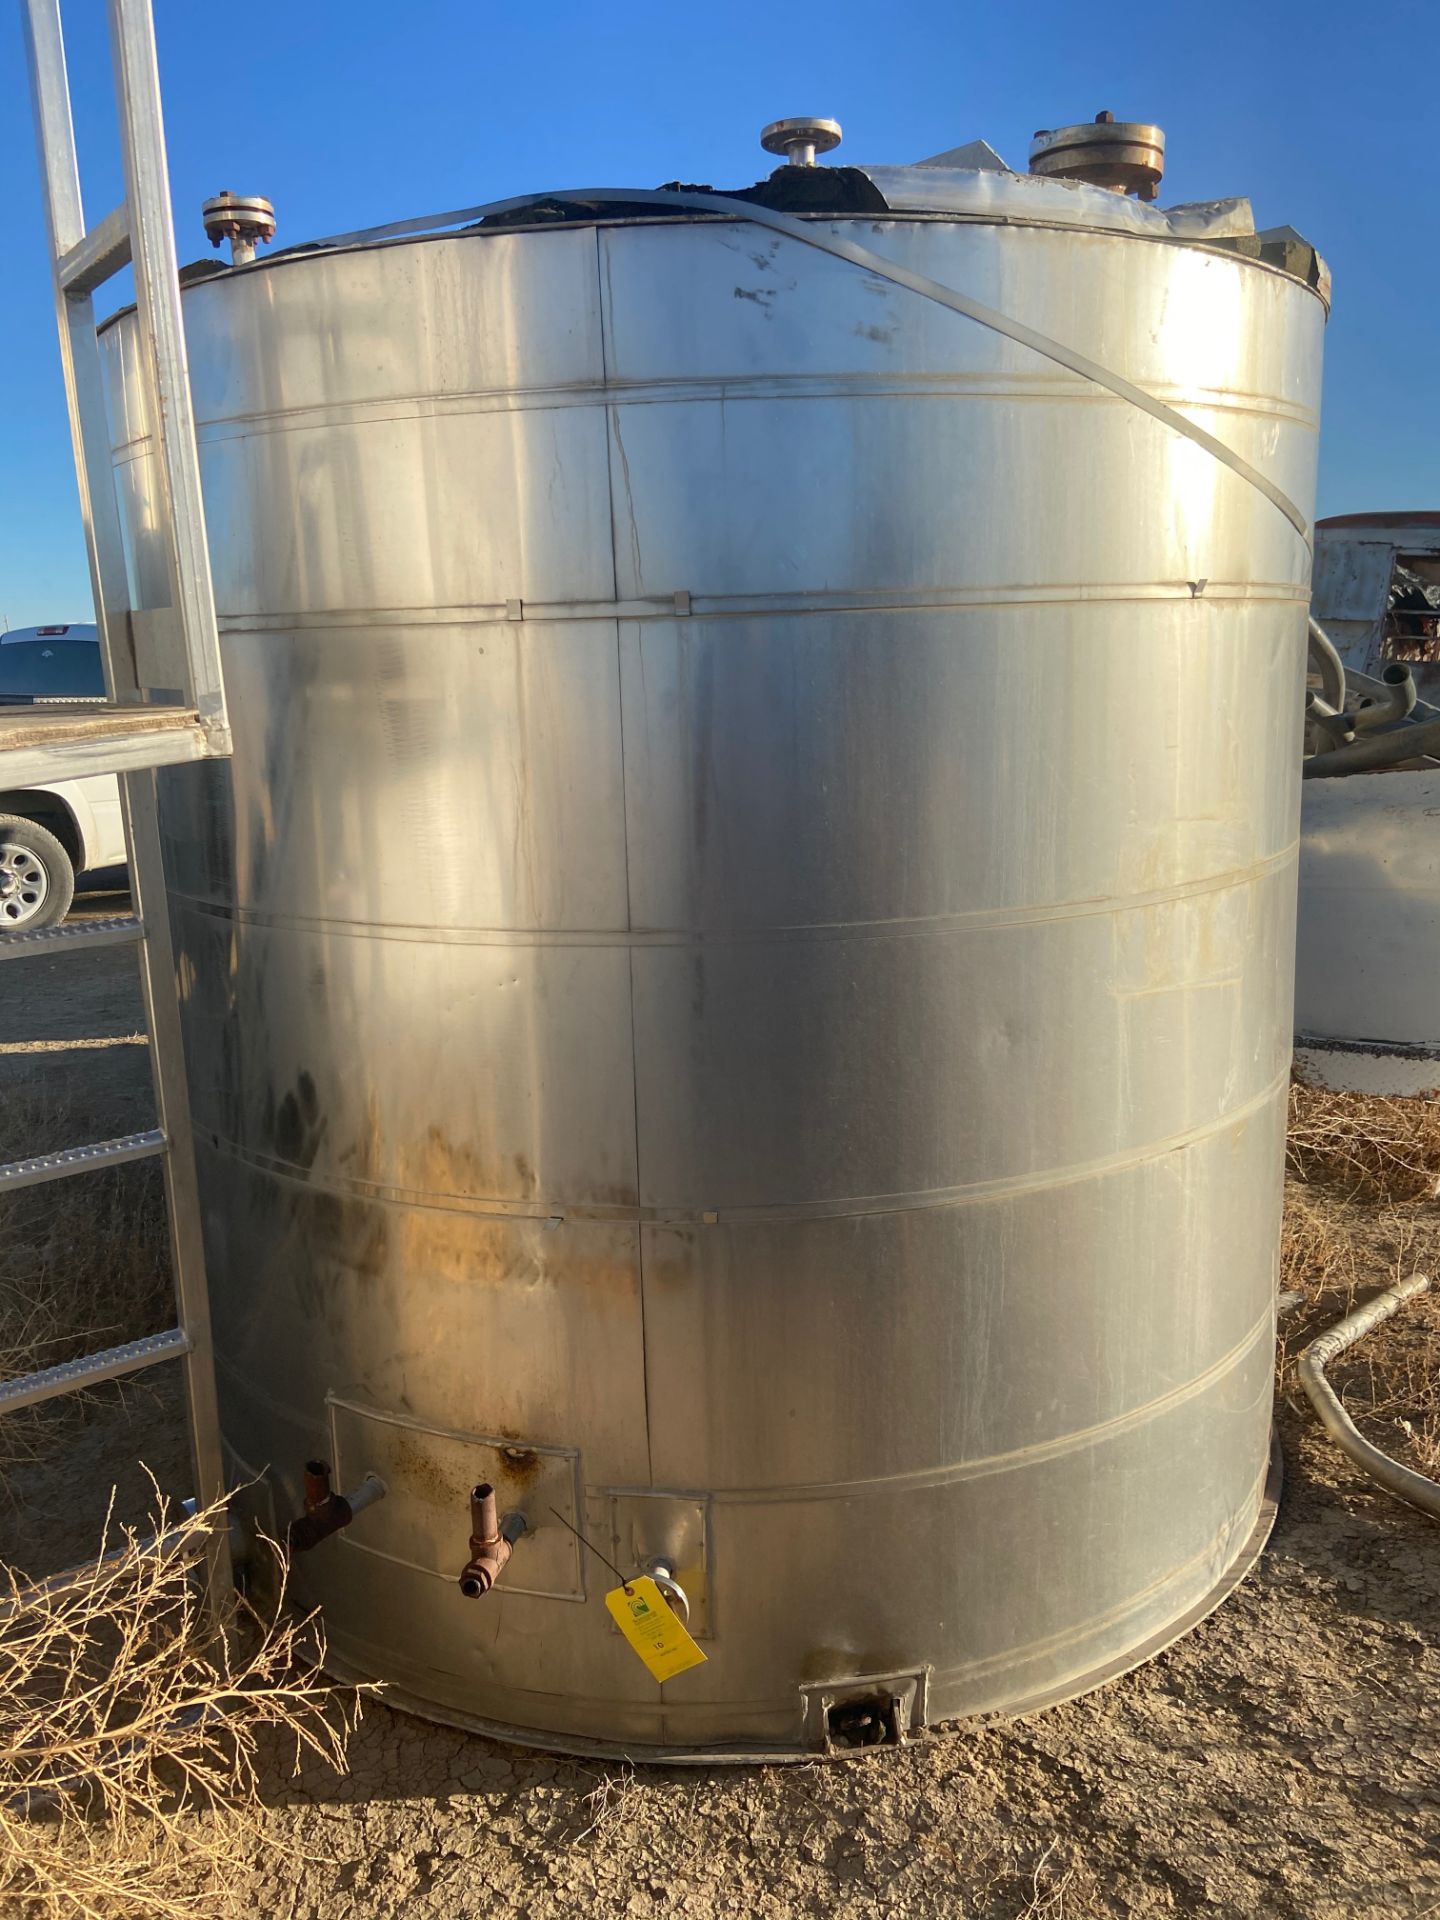 Stainless Steel Jacketed Tank, Rigging/ Loading Fee: $75